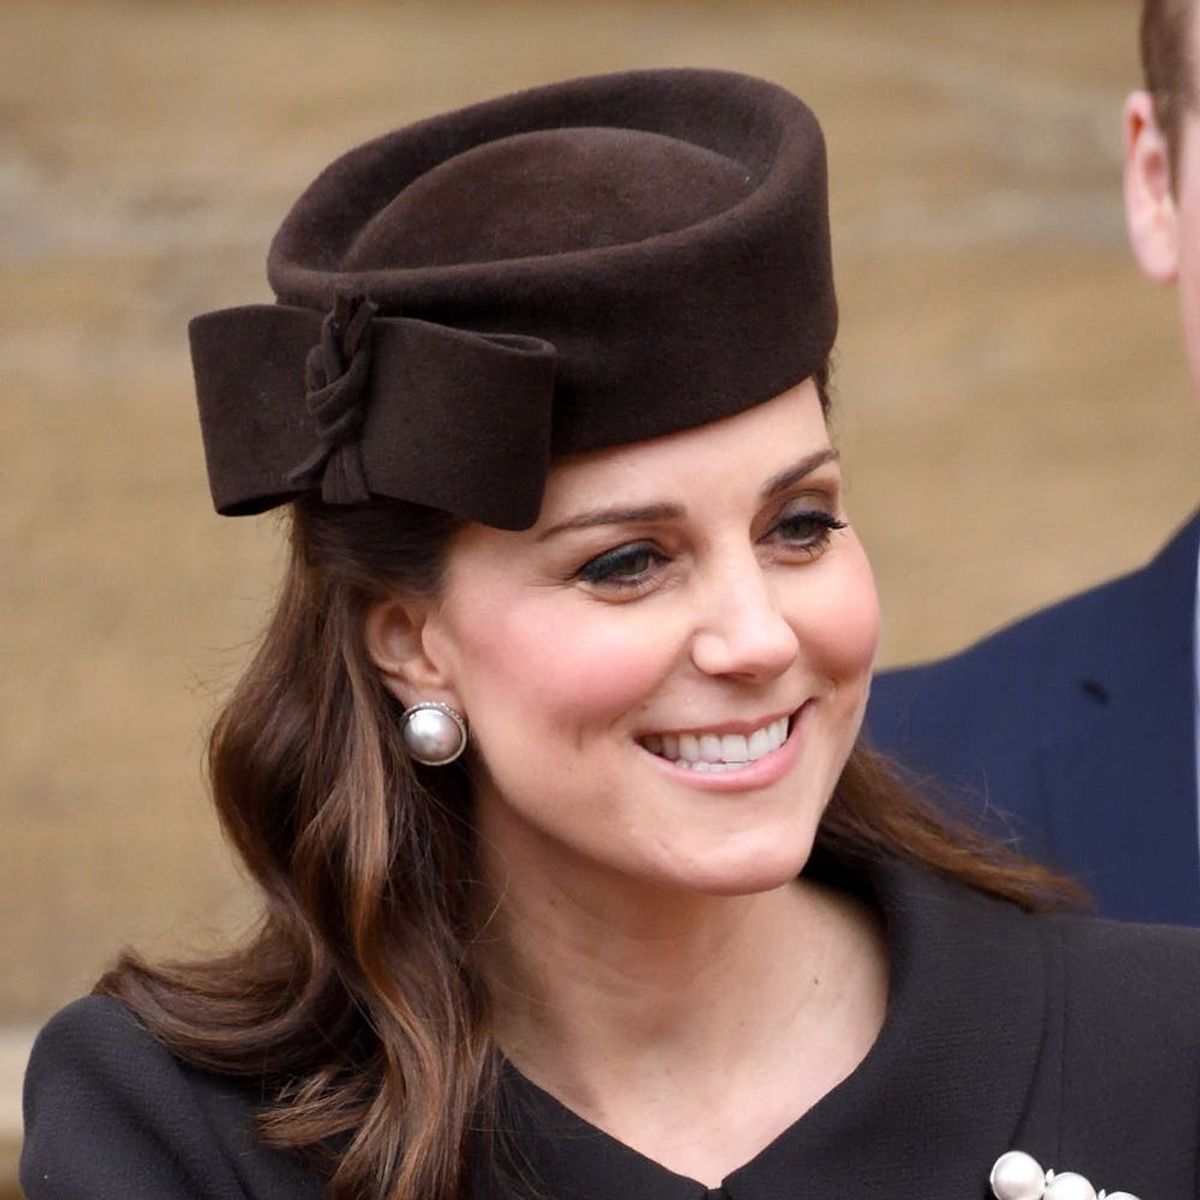 Kate Middleton Makes a Surprise Easter Appearance in Pearls